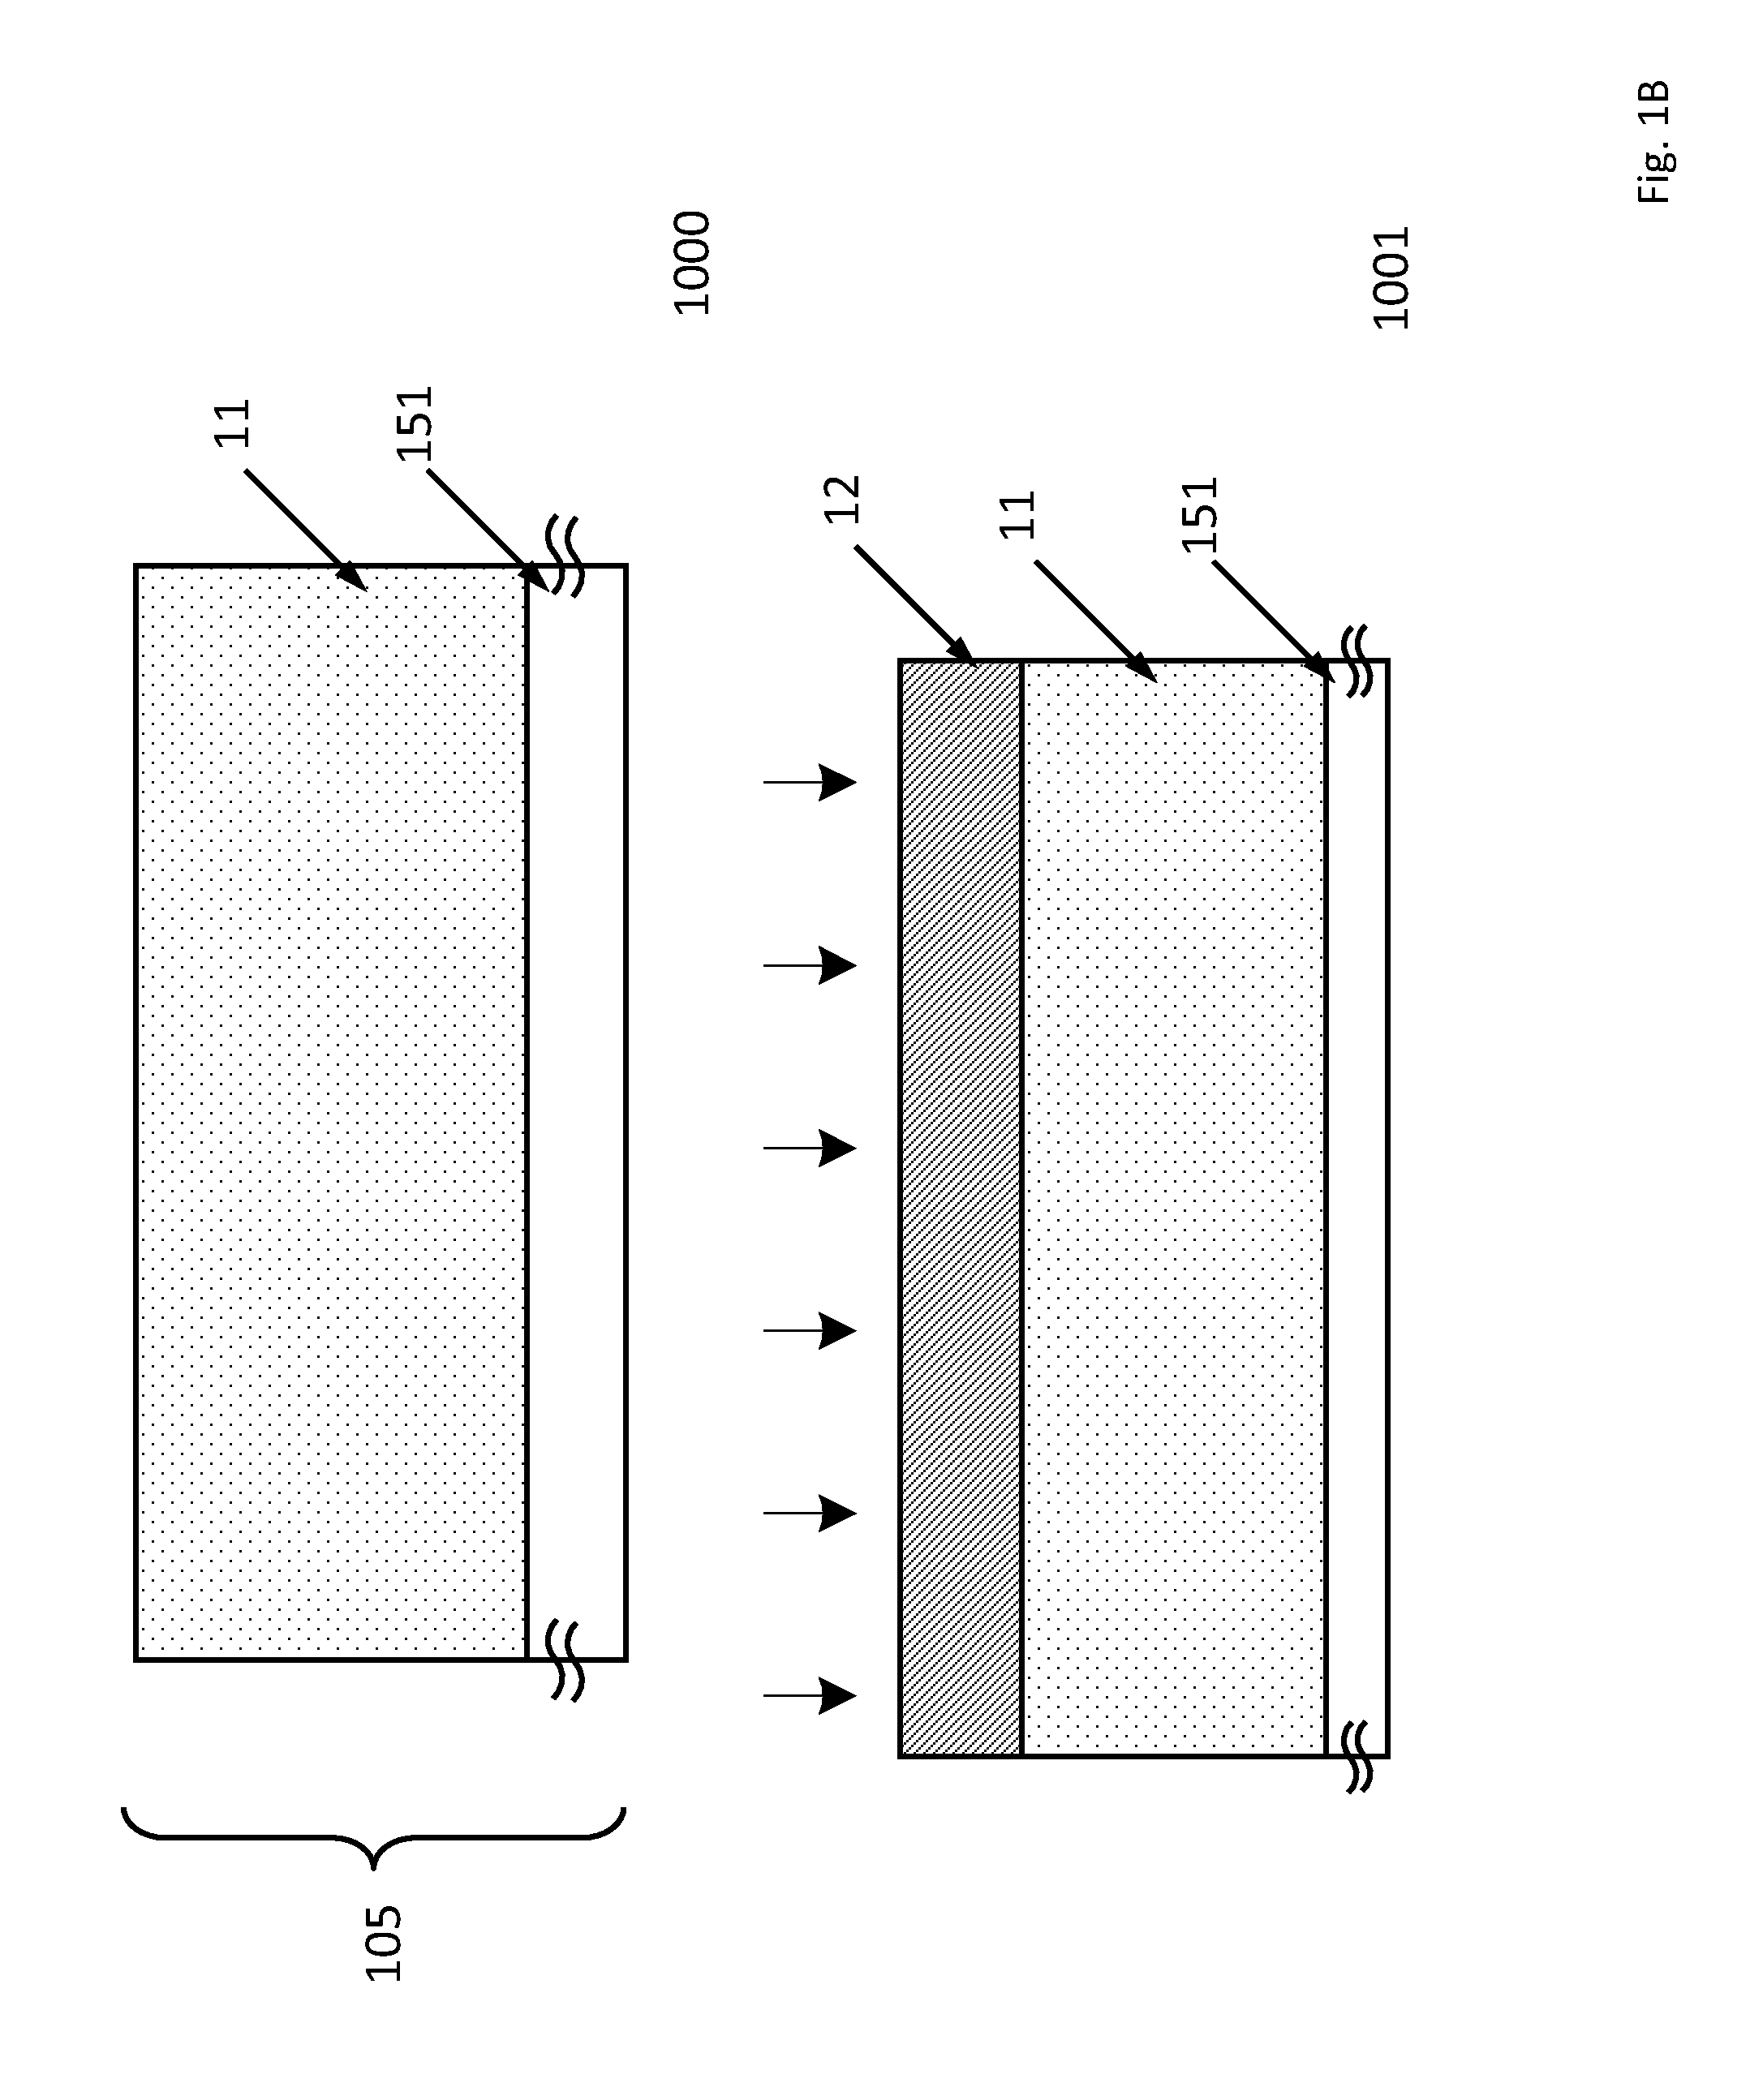 Vertical pillar structured photovoltaic devices with mirrors and optical claddings